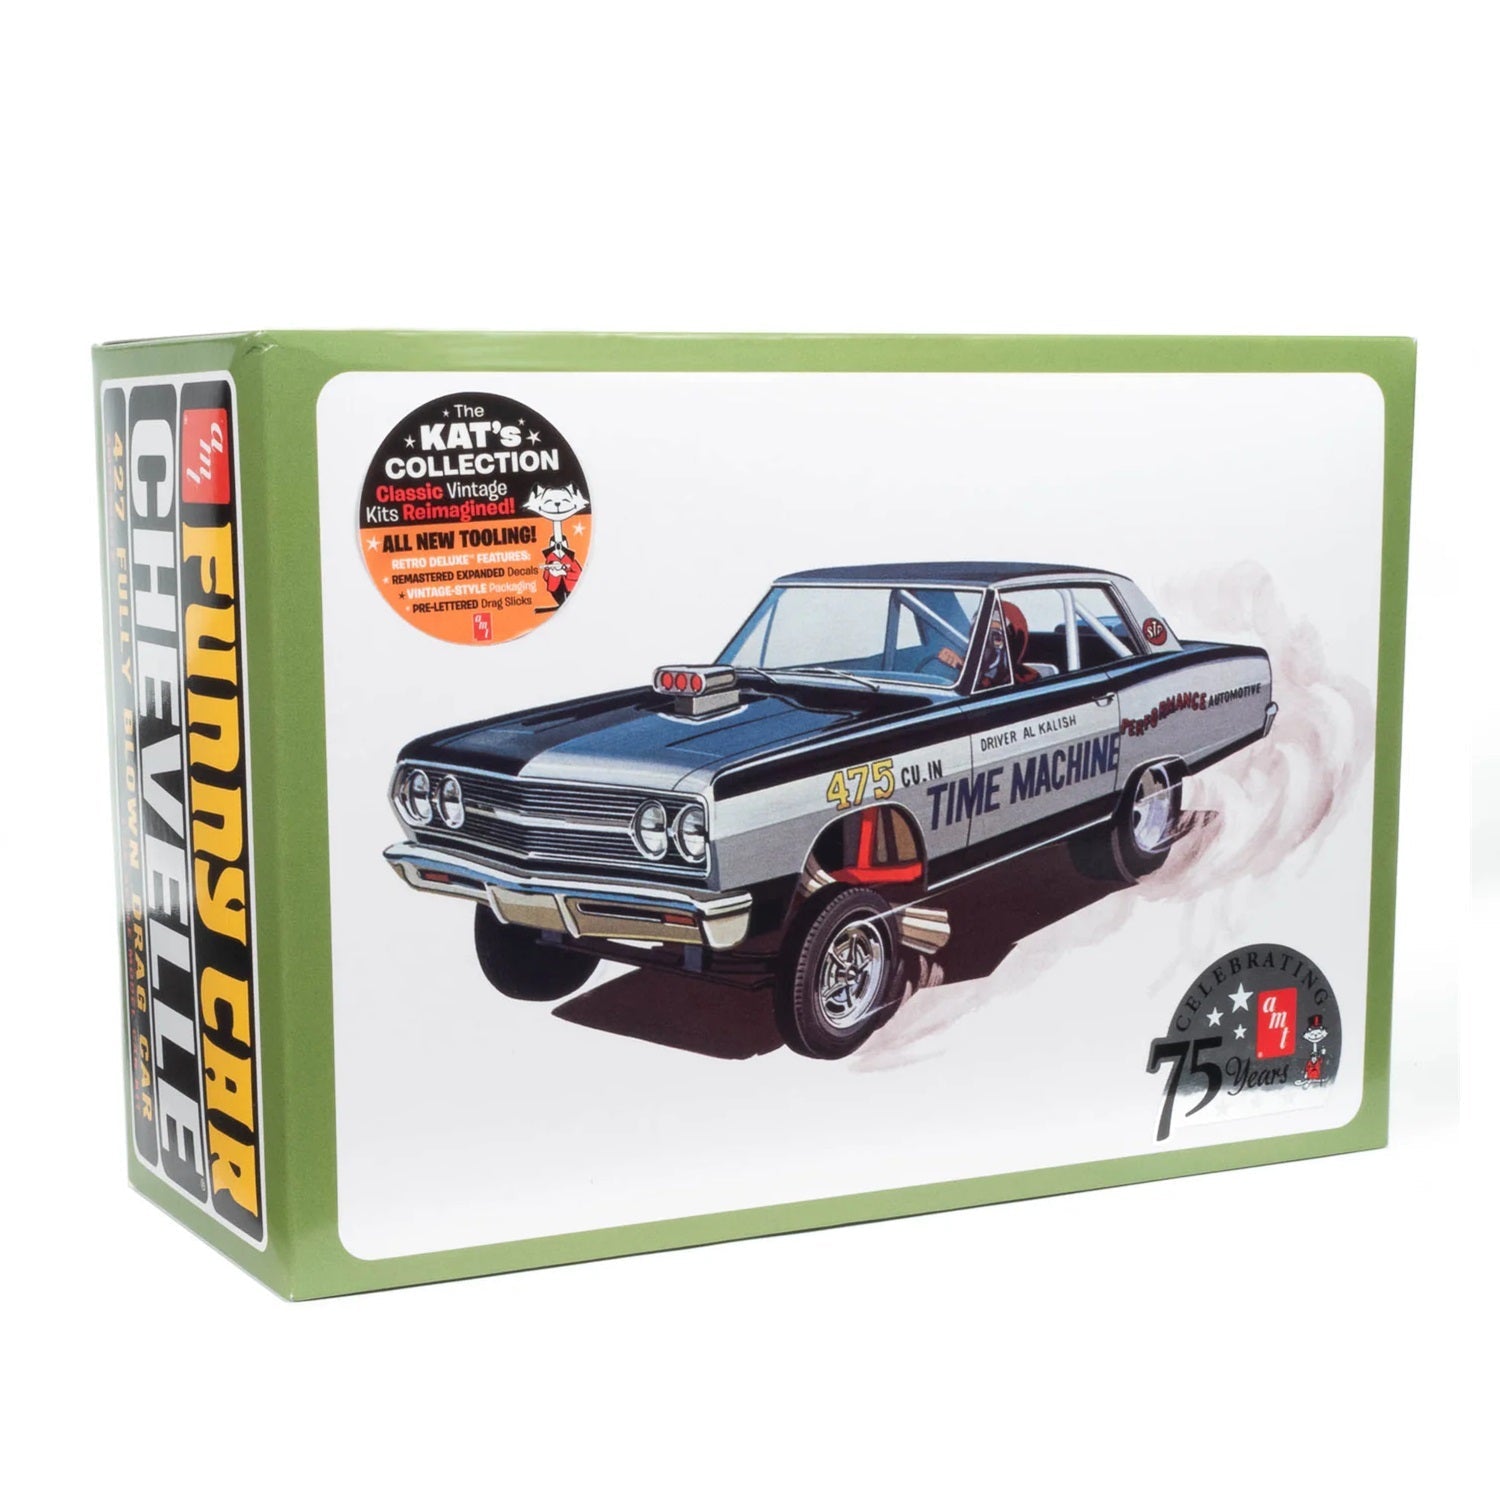 AMT 1965 Chevy Chevelle Altered Wheelbase Funny Car "Time Machine" Plastic Model Kit, 1/25 Scale - Micro - Mark Scale Model Kits